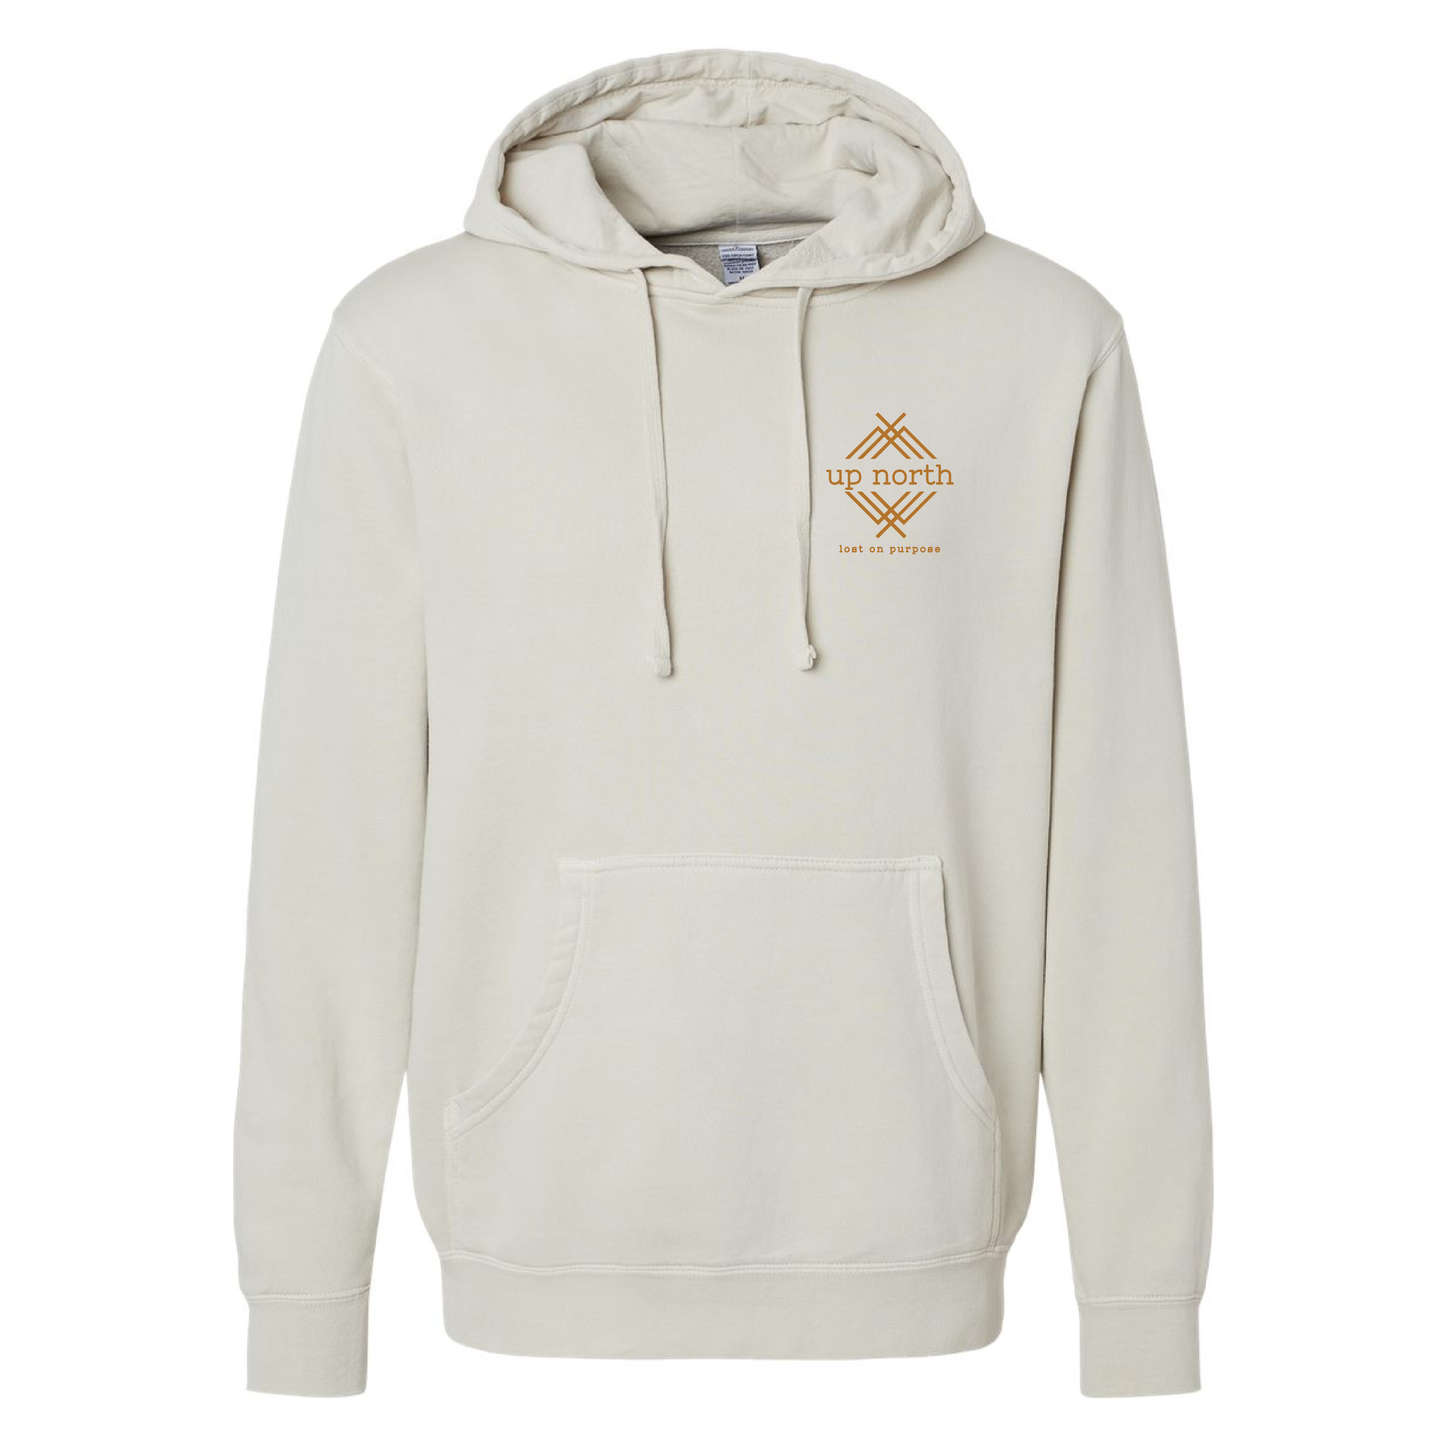 Lost on Purpose - Pigment Dyed Hoodie - Ivory